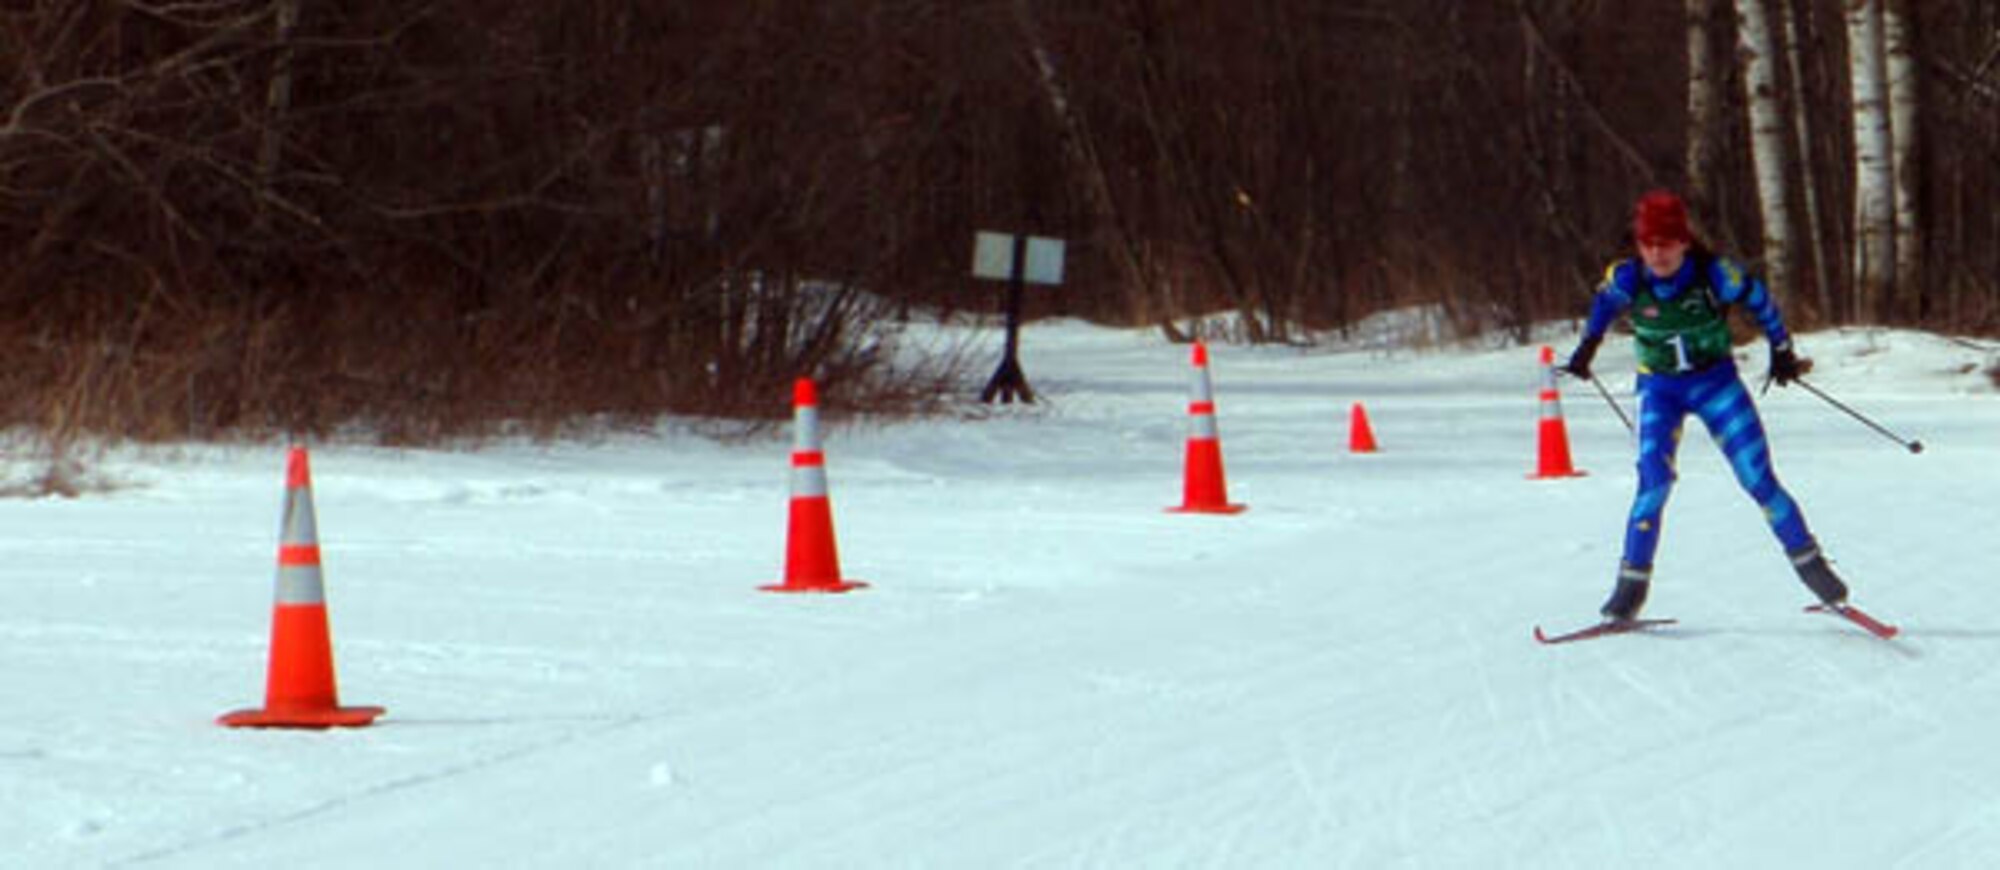 Maj. Becky King of the Alaska Air National Guard competes in the Chief National Guard Biathlon Championships at Camp Ripley, Minn., on March 5, 2010.